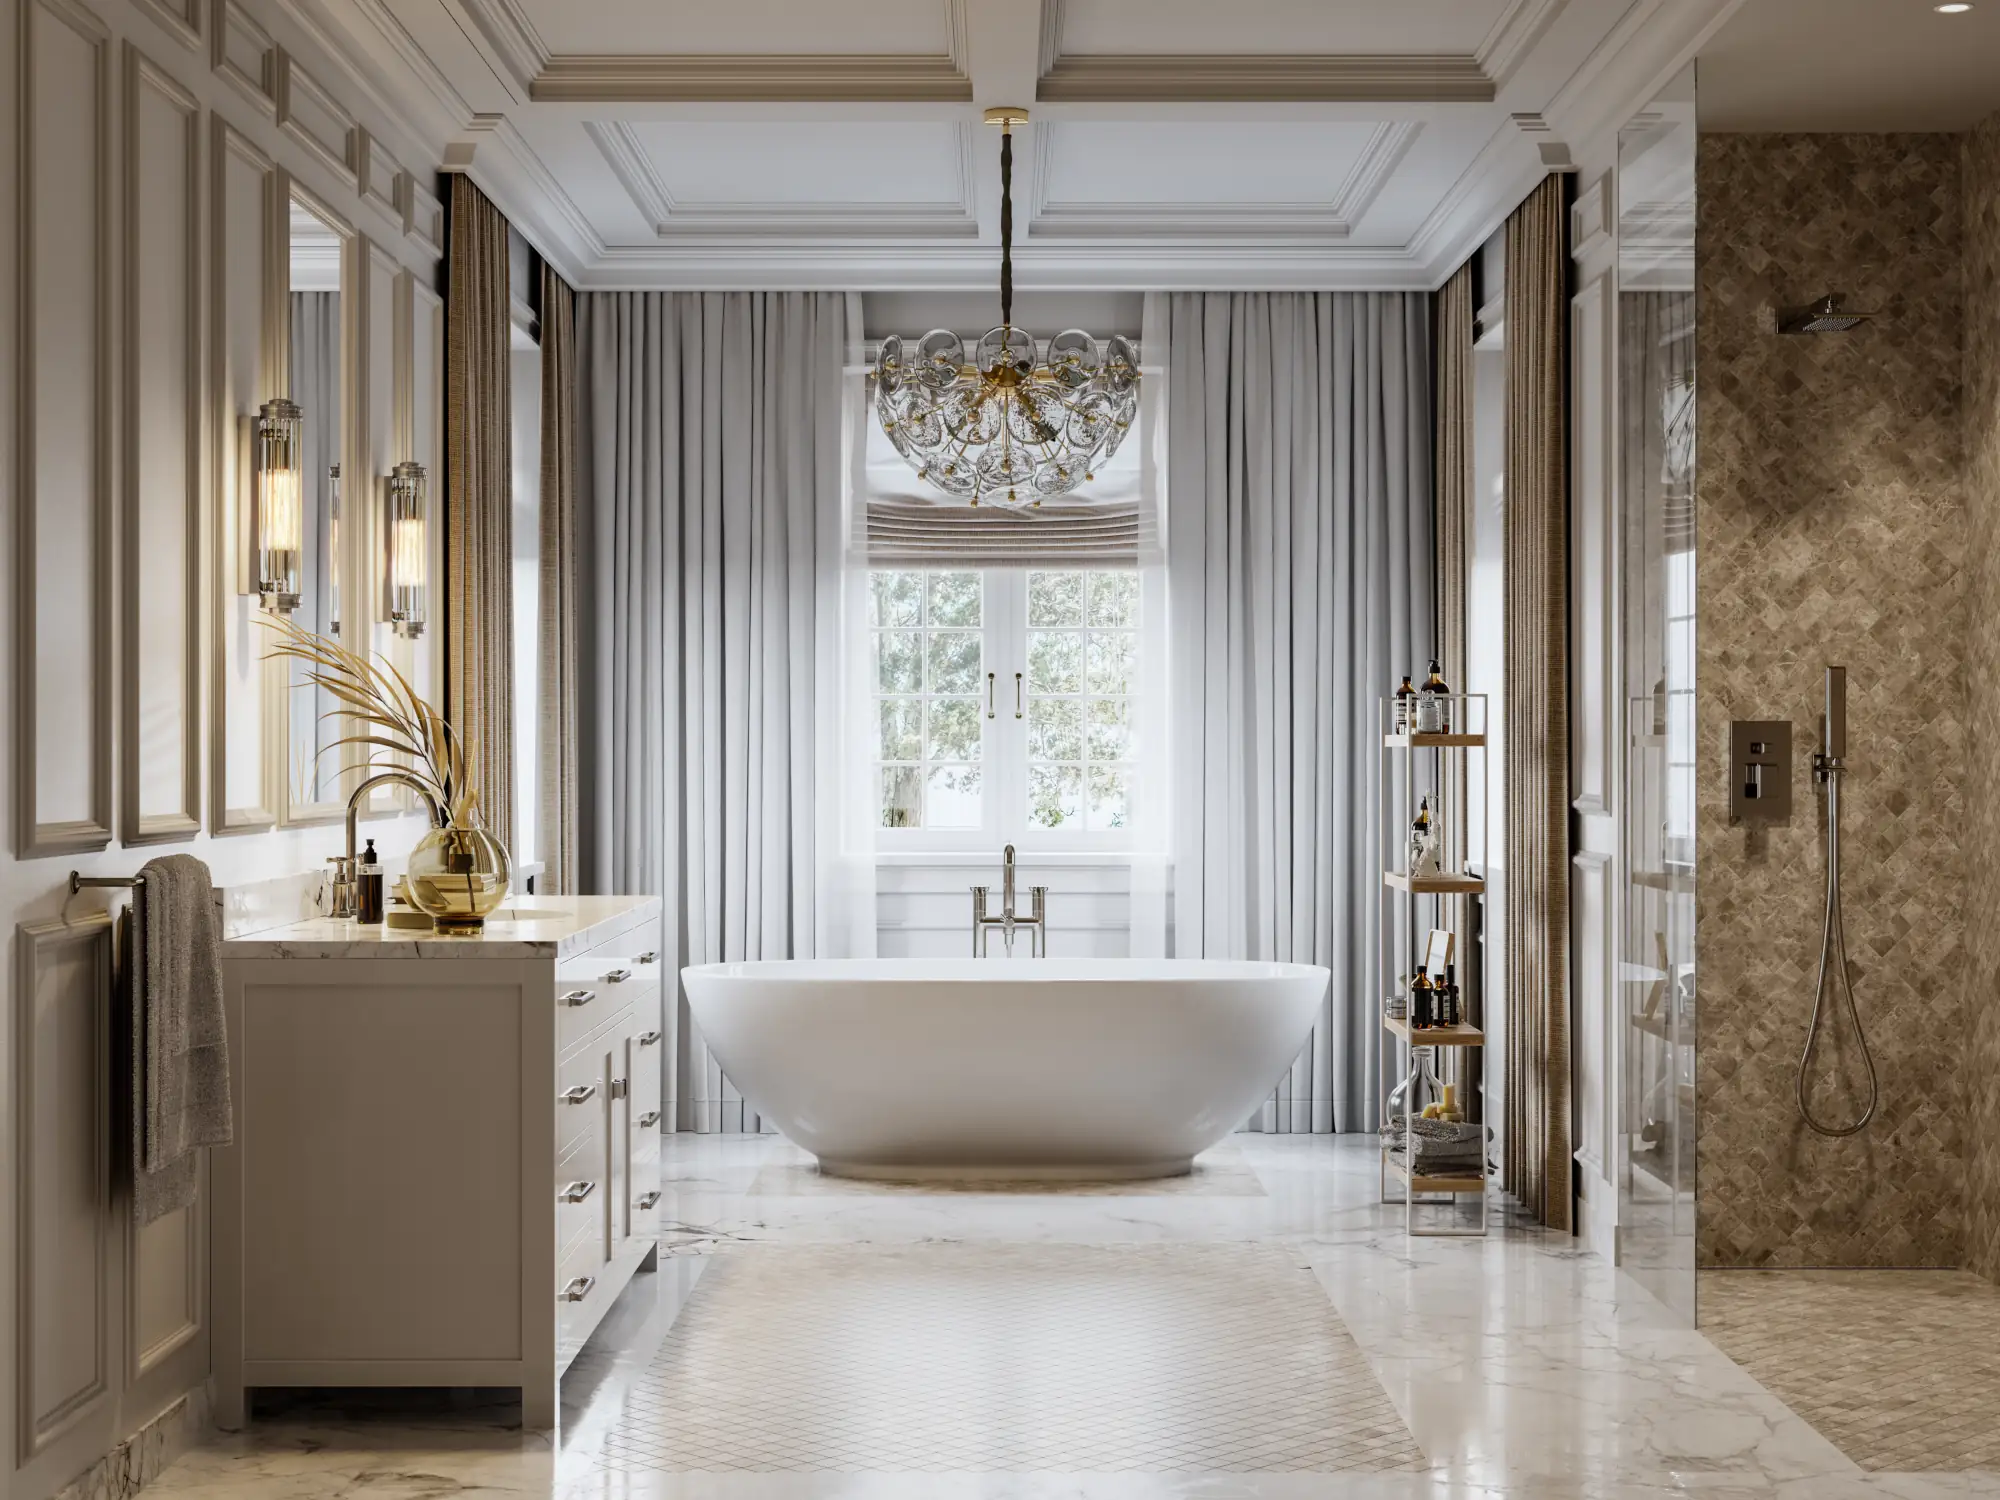 A luxury bathroom features extensive millwork/woodwork trim details, drapery, freestanding bathing tub, custom vanity cabinet and stone countertop in this luxury grade home.